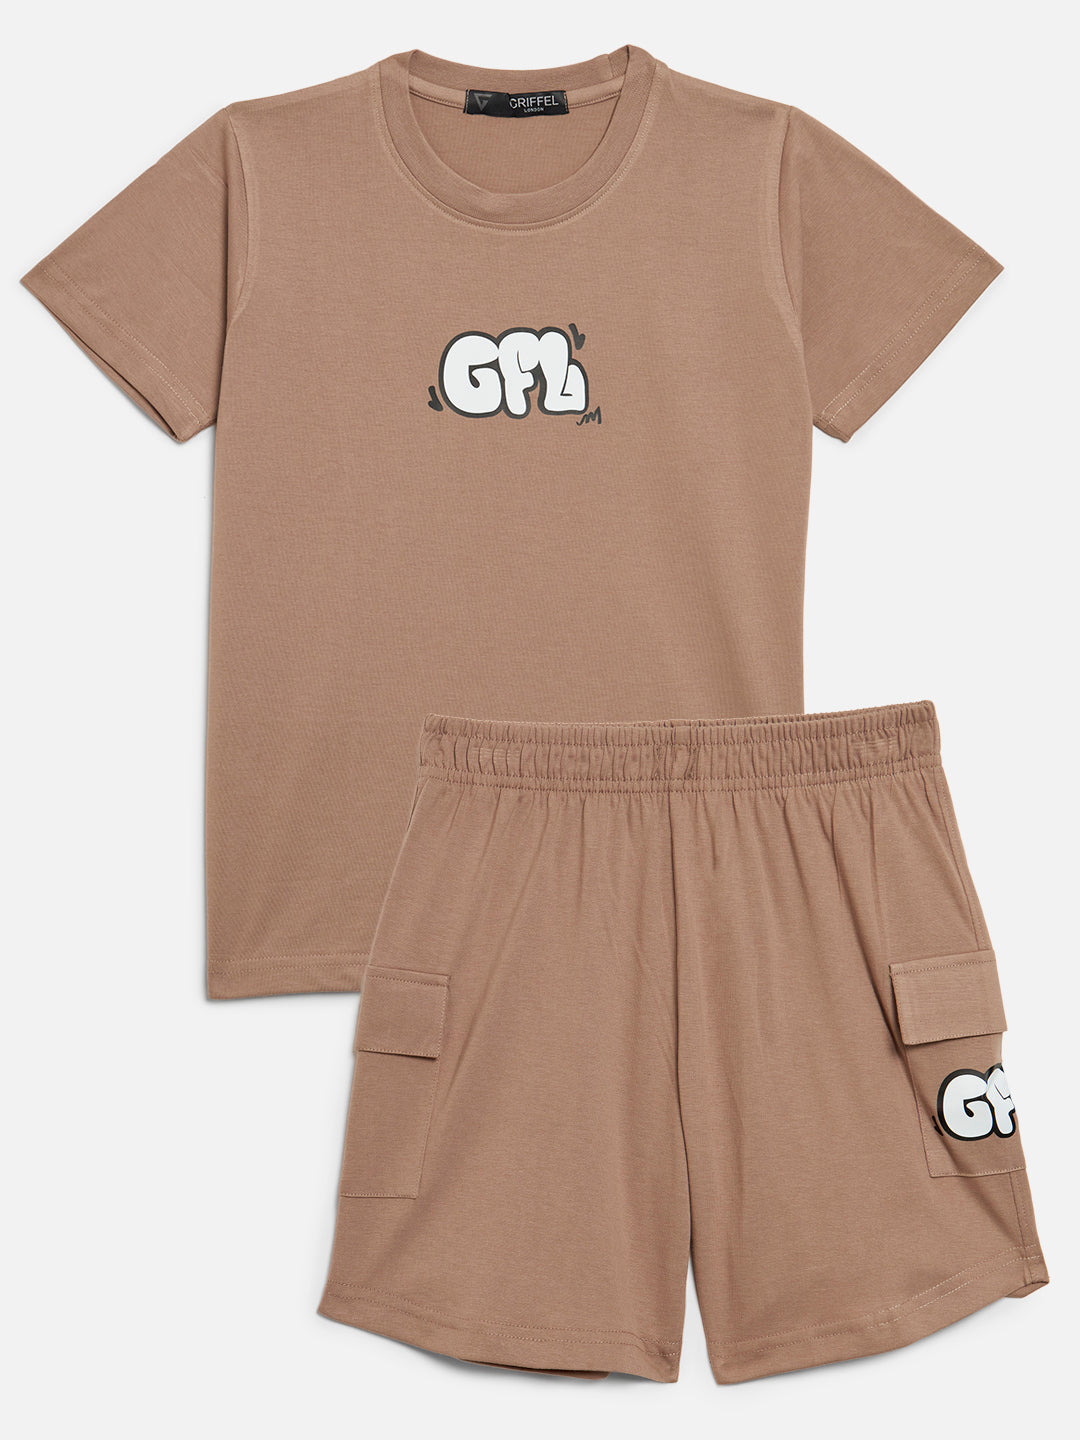 GRIFFEL Girls Kids Brown WRLDWIDE Co-Ord T-shirt and Short Set - griffel